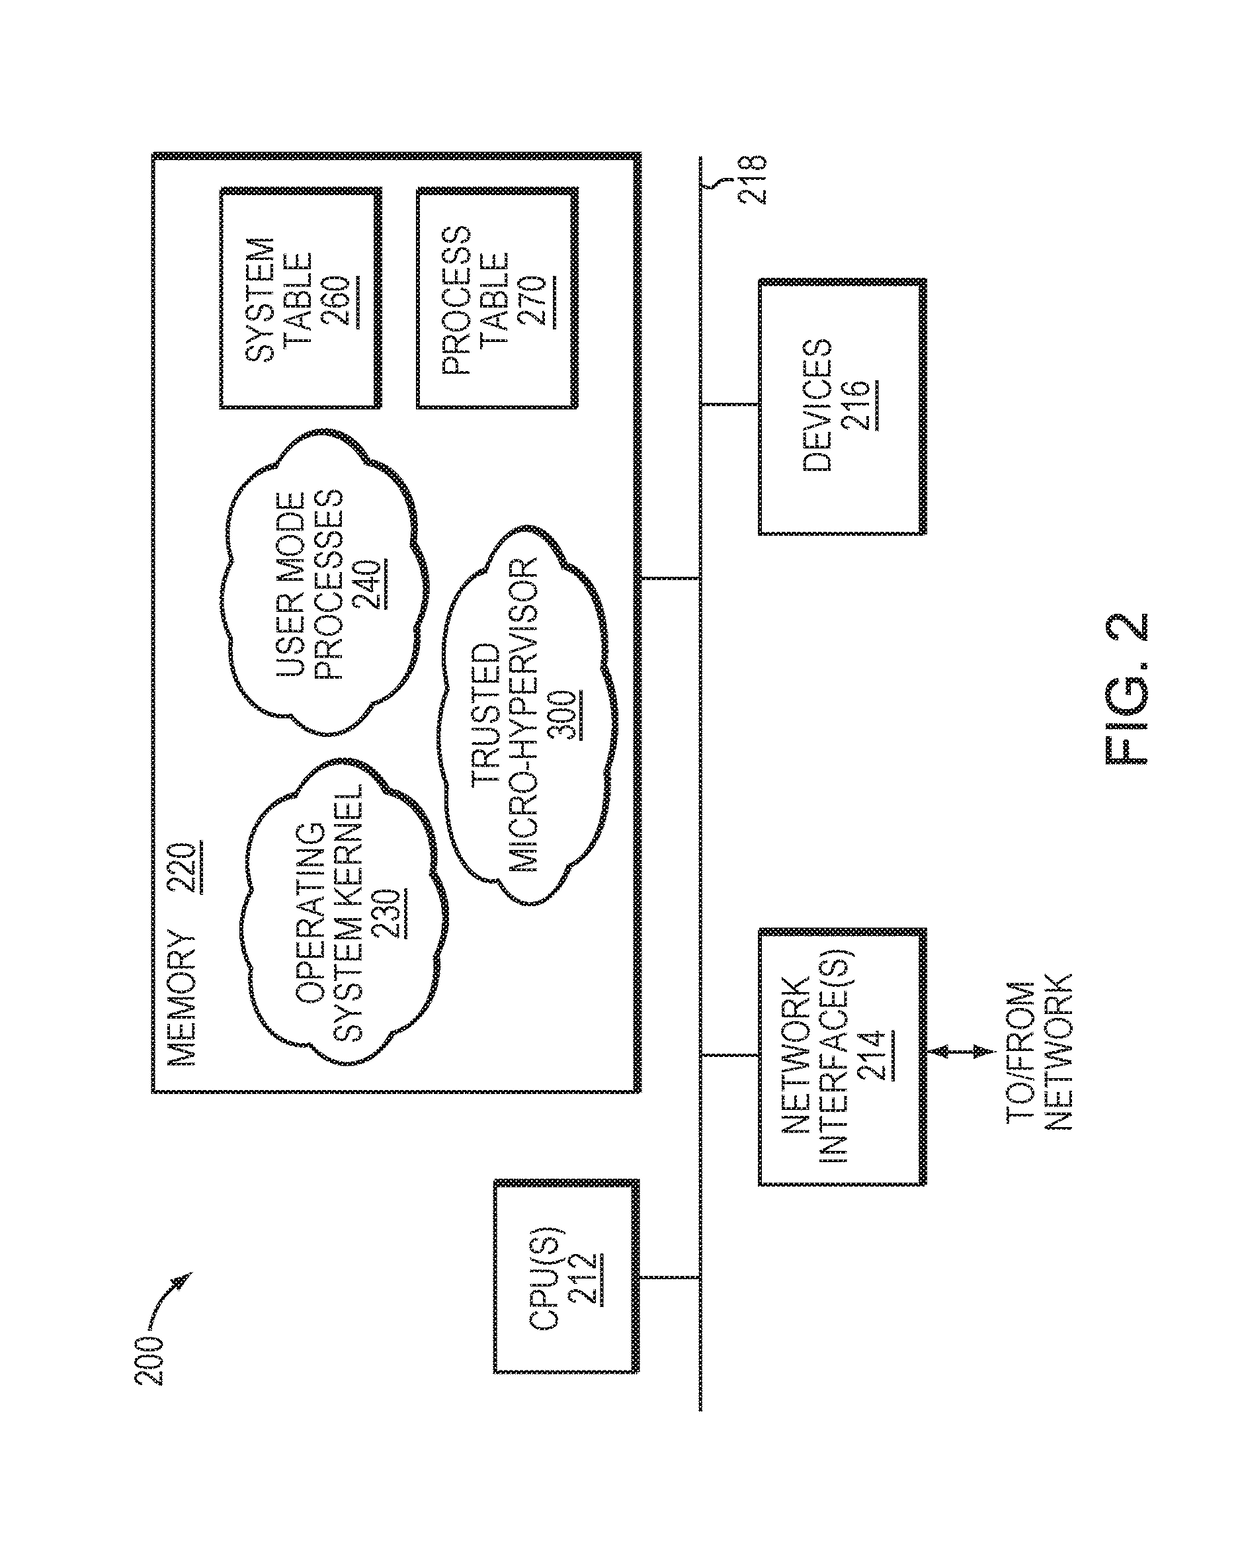 Verification of complex software code using a modularized architecture